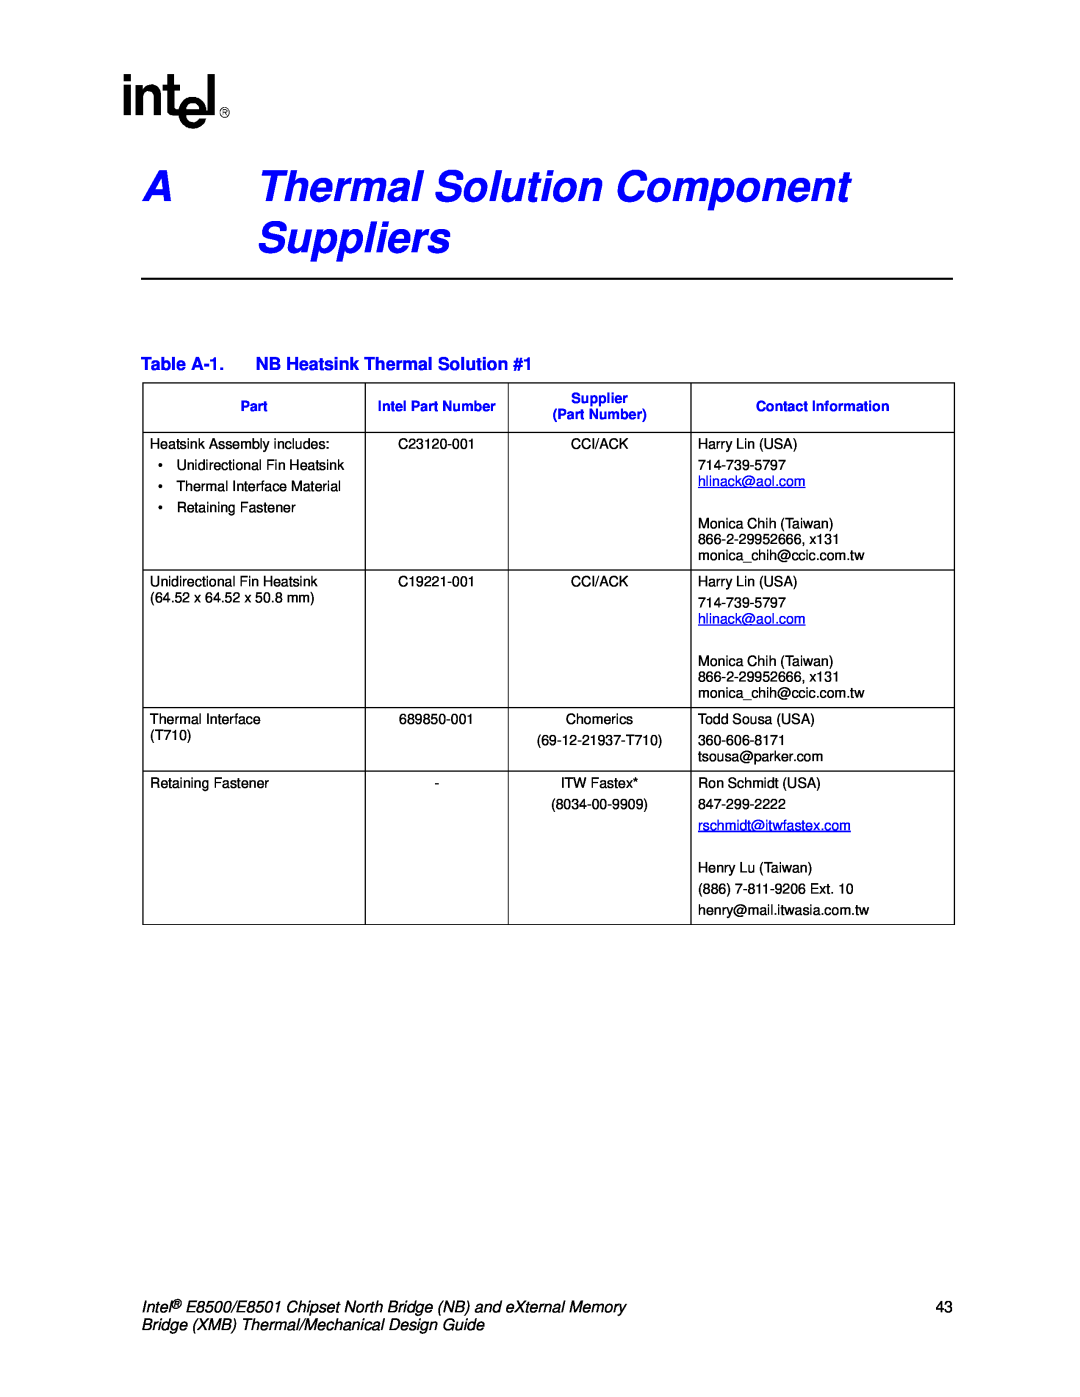 Intel E8501 manual AThermal Solution Component Suppliers, Bridge XMB Thermal/Mechanical Design Guide, Intel Part Number 